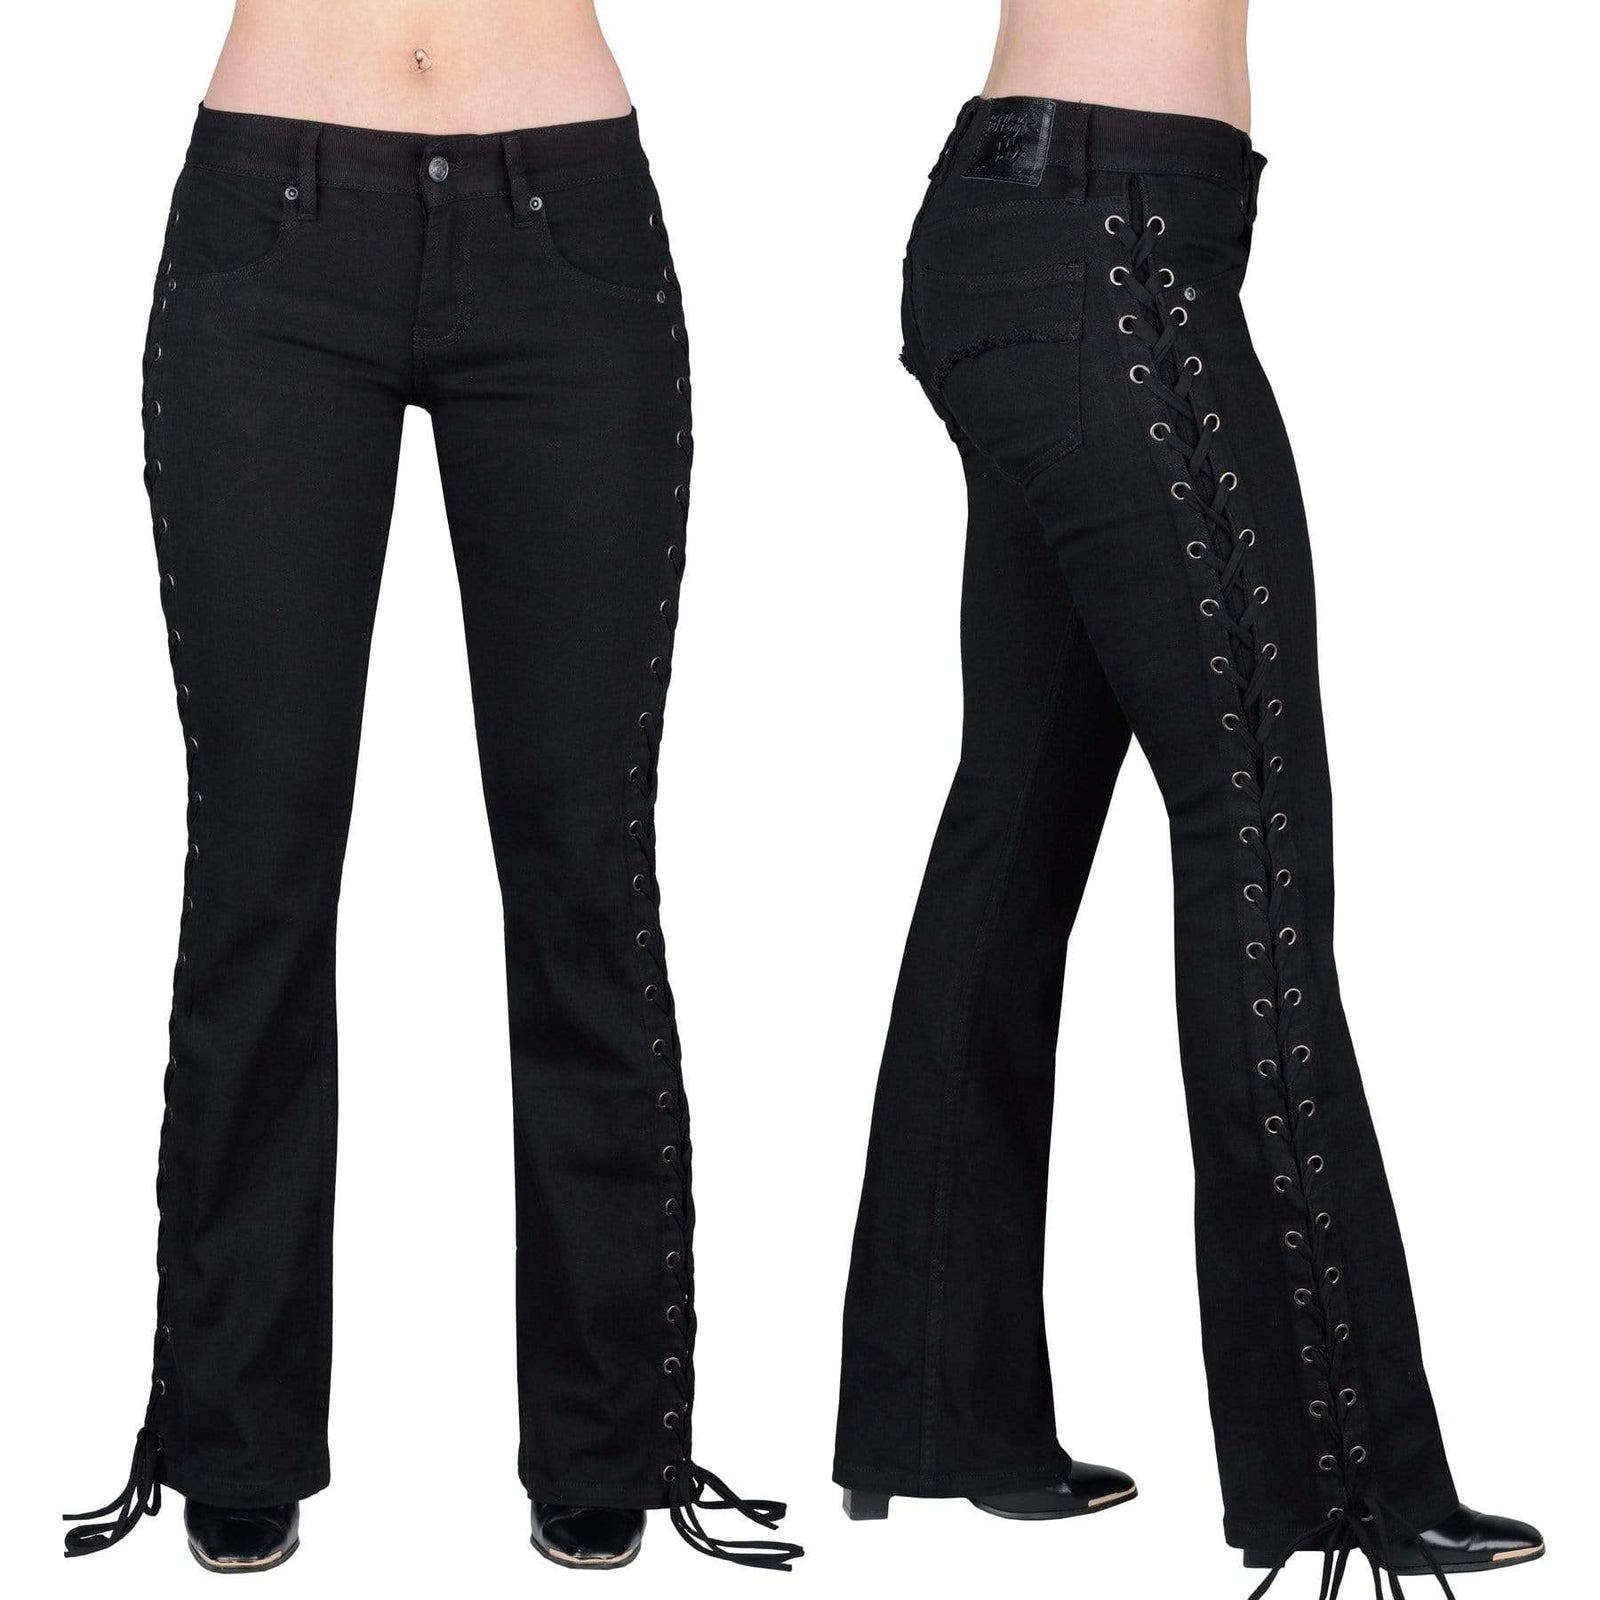 Essentials Collection Pants Hellraiser Side Laced Unisex Jeans - Black